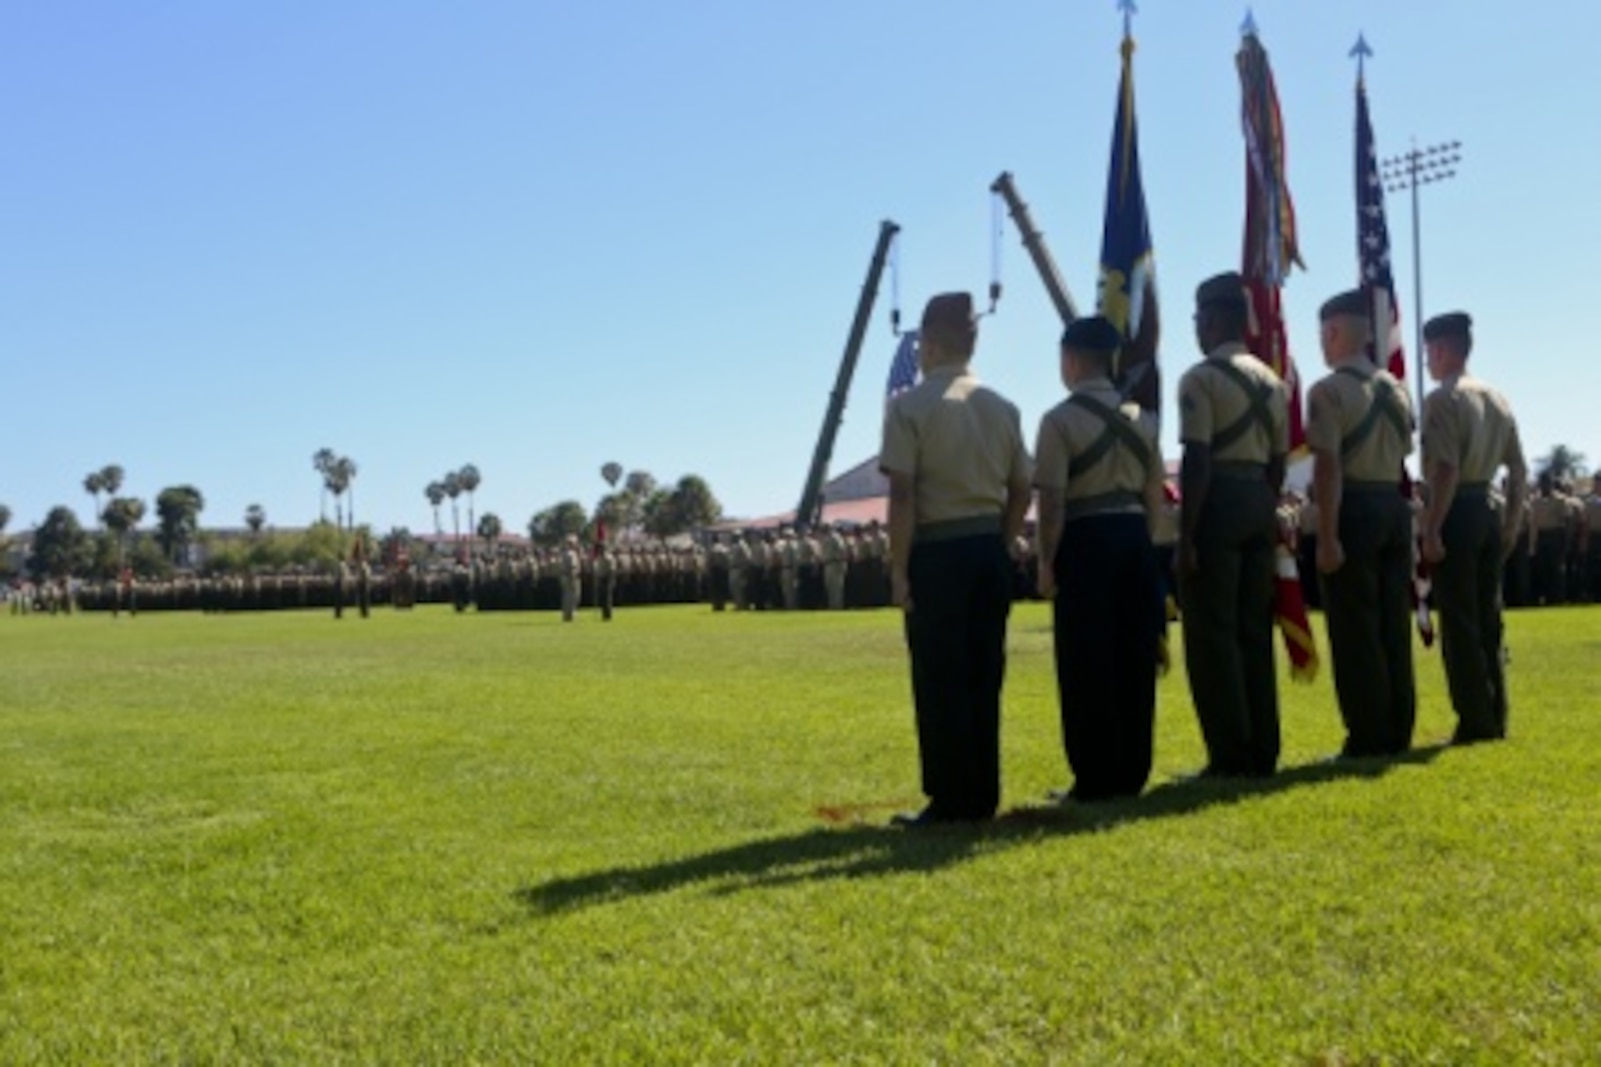 U.S. Marines of 1st Marine Logistics Group take part in the Change of Command Ceremony aboard Camp Pendleton, Calif., July 24, 2015. The Change of Command for 1st MLG showcased the passing of command from Maj. Gen. Vincent A. Coglinese to Brig. Gen. David a Ottignon. (U.S. Marine Corps photo by Lance Cpl. Lauren Falk/Released)
